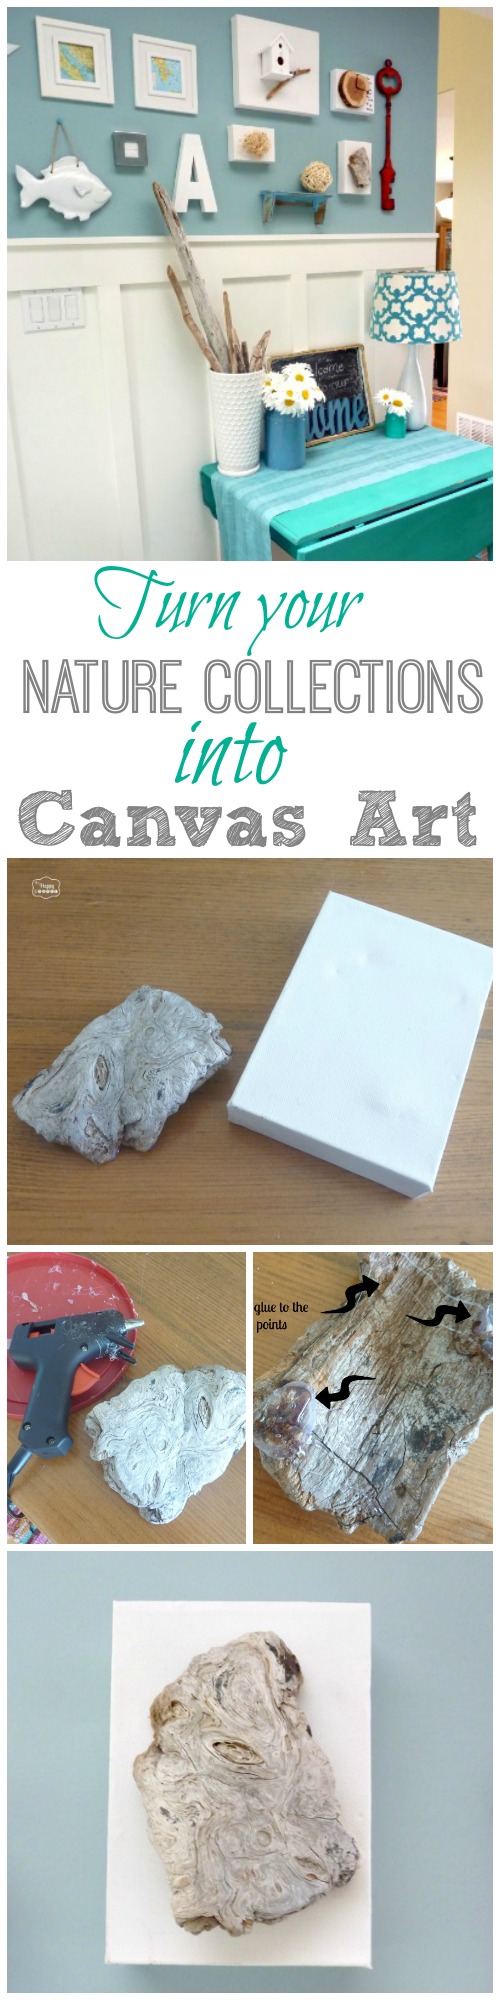 Turn Your Nature Collections into Canvas Art at The Happy Housie